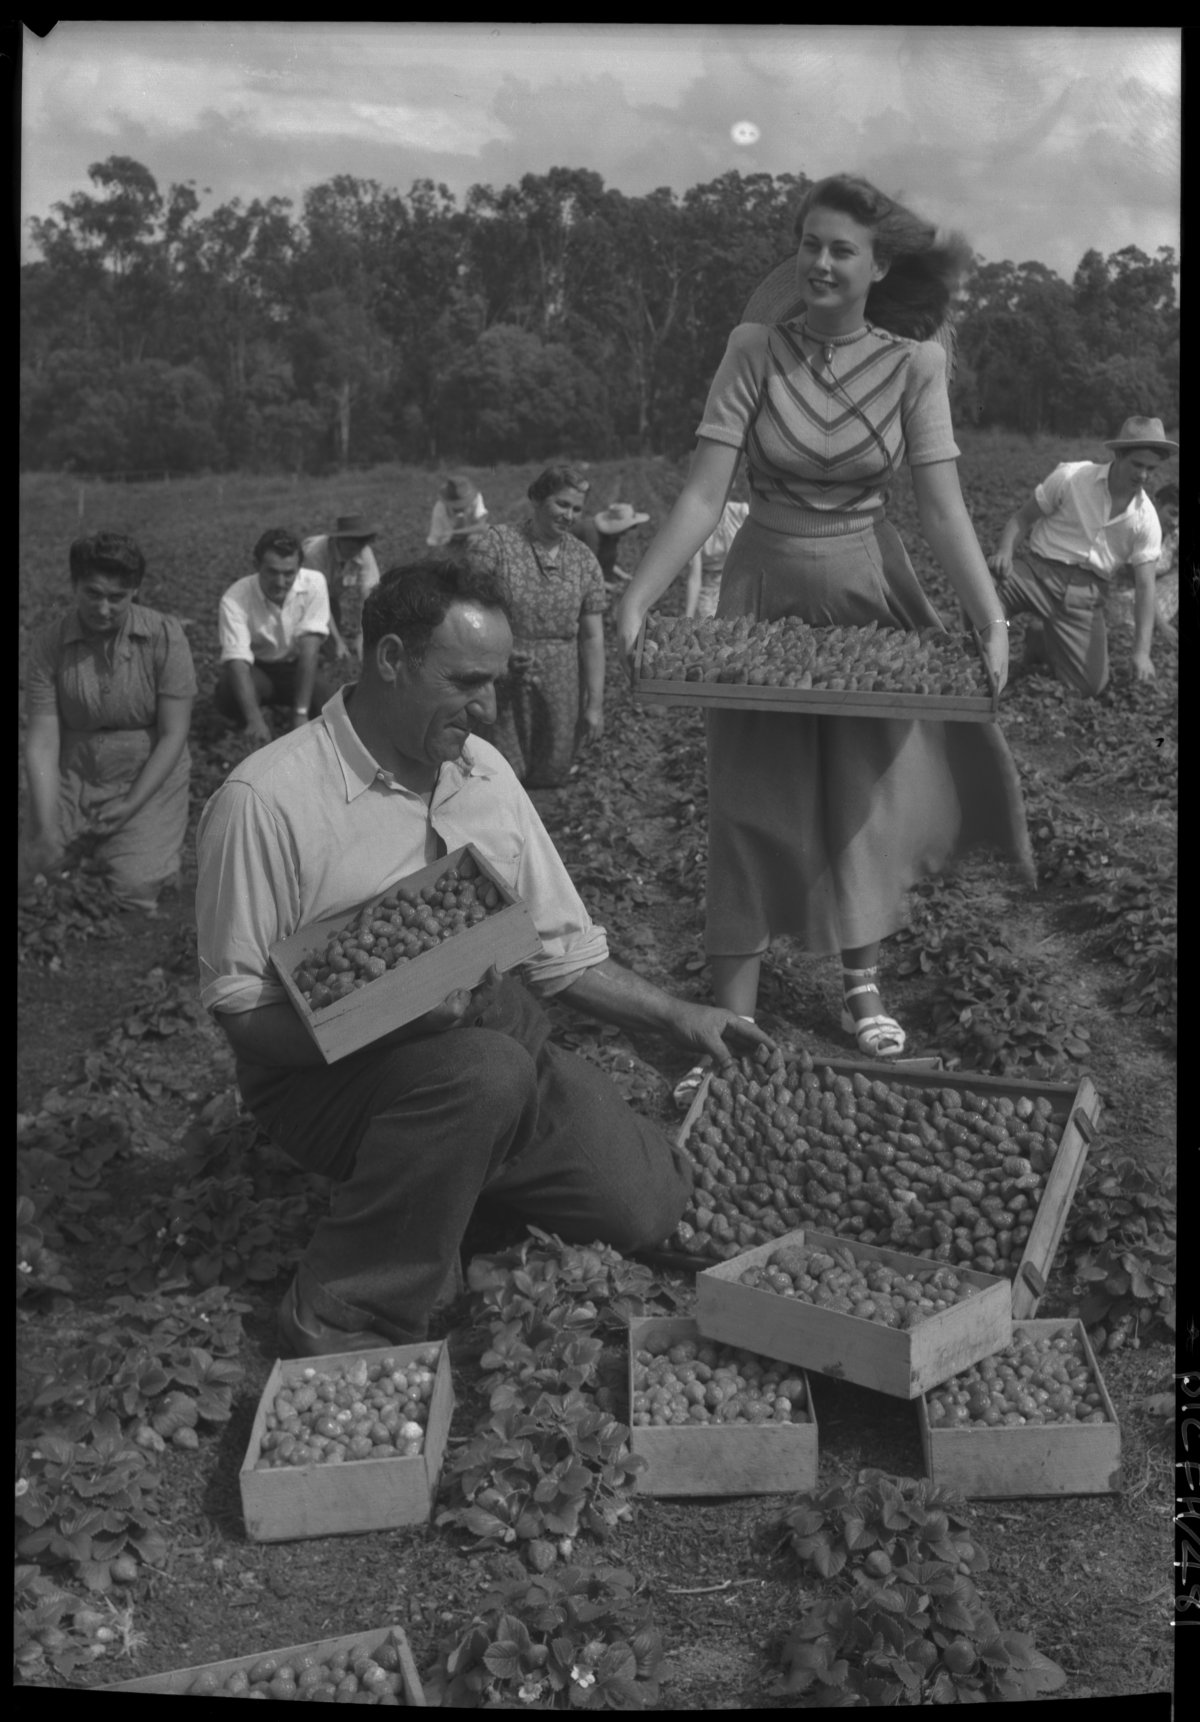 A man sits in the forground. He is holding a box of strawberries, he is also surrounded by boxes of strawberries. A woman in a skirt and patterned top is approaching him carrying a box of strawberries. Behind them are several other people picking strawberries. They are outside in a field. Trees line the horizon.